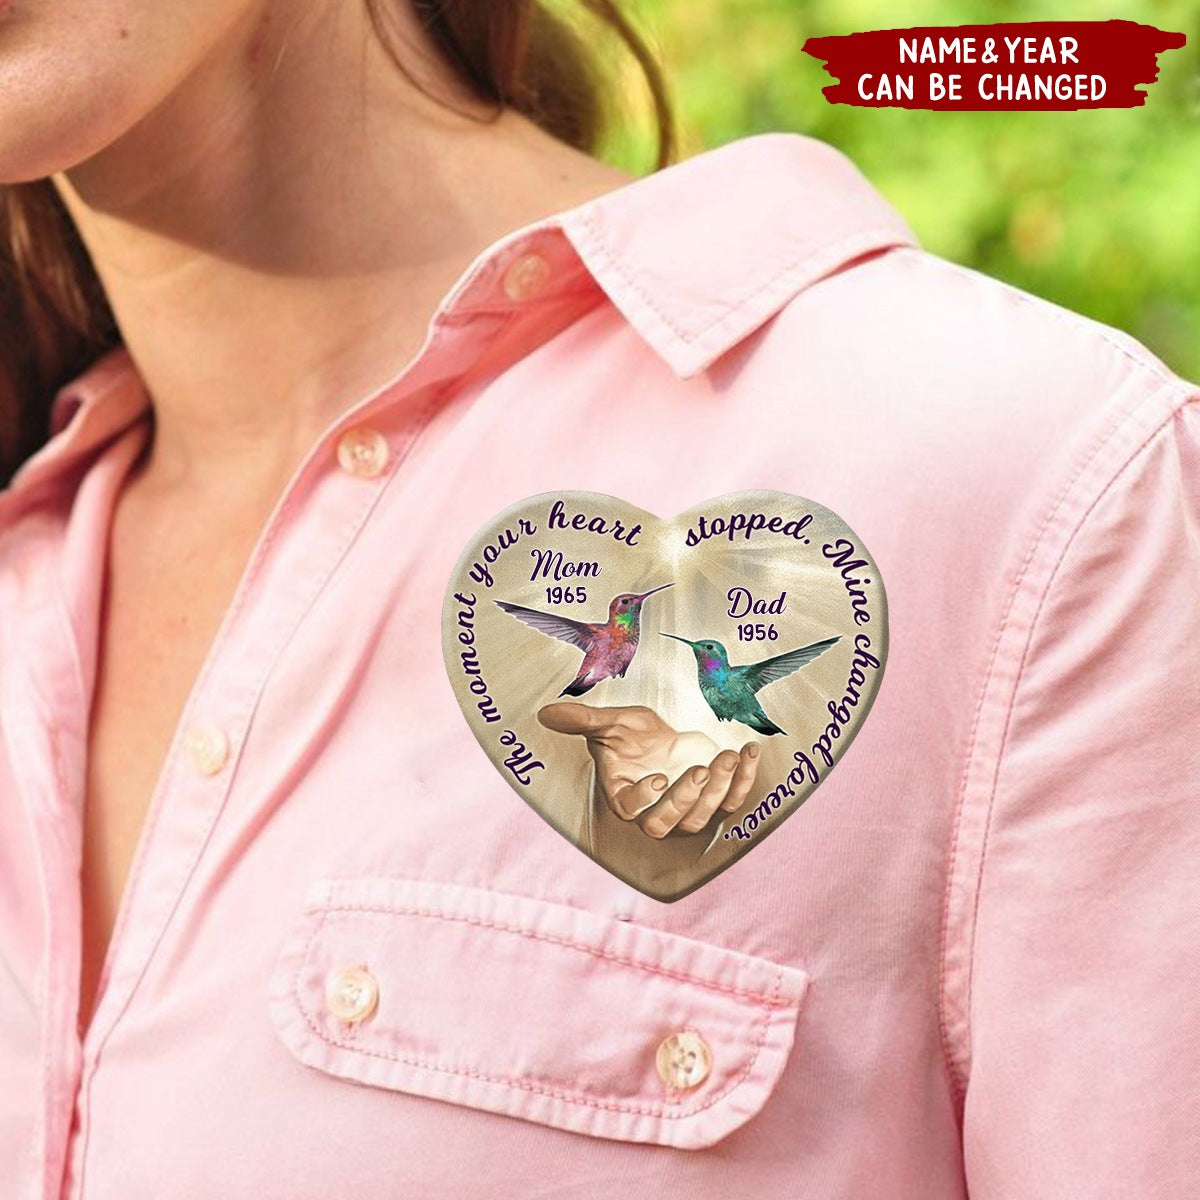 The Moment Your Heart Stopped, Mine Changed Forever Personalized Memorial Button Pin